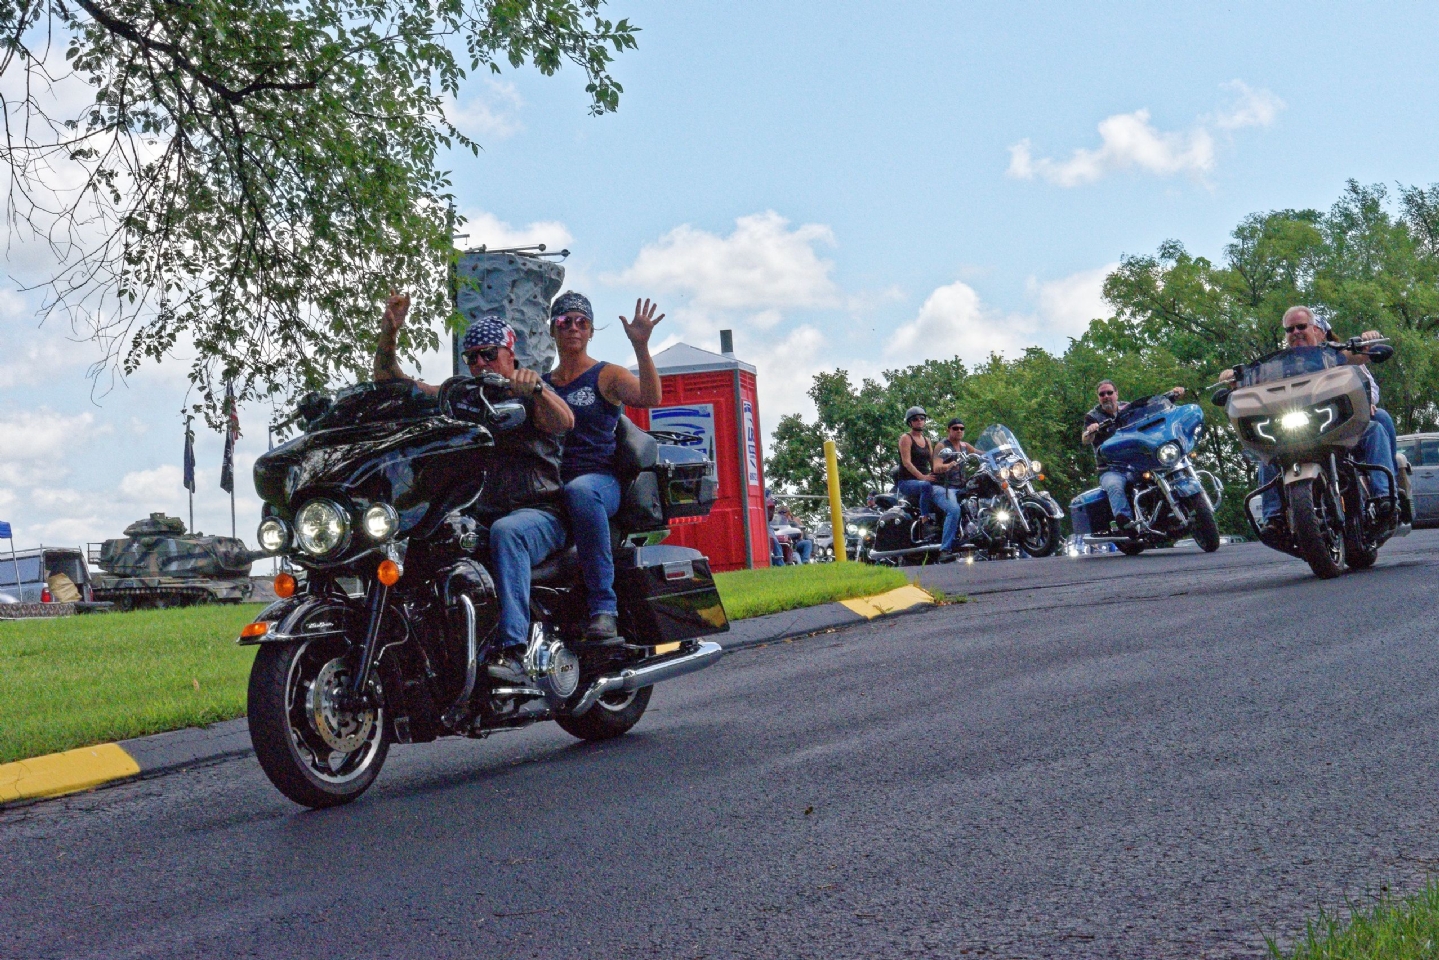 The Rockford riders head south after a fun afternoon.